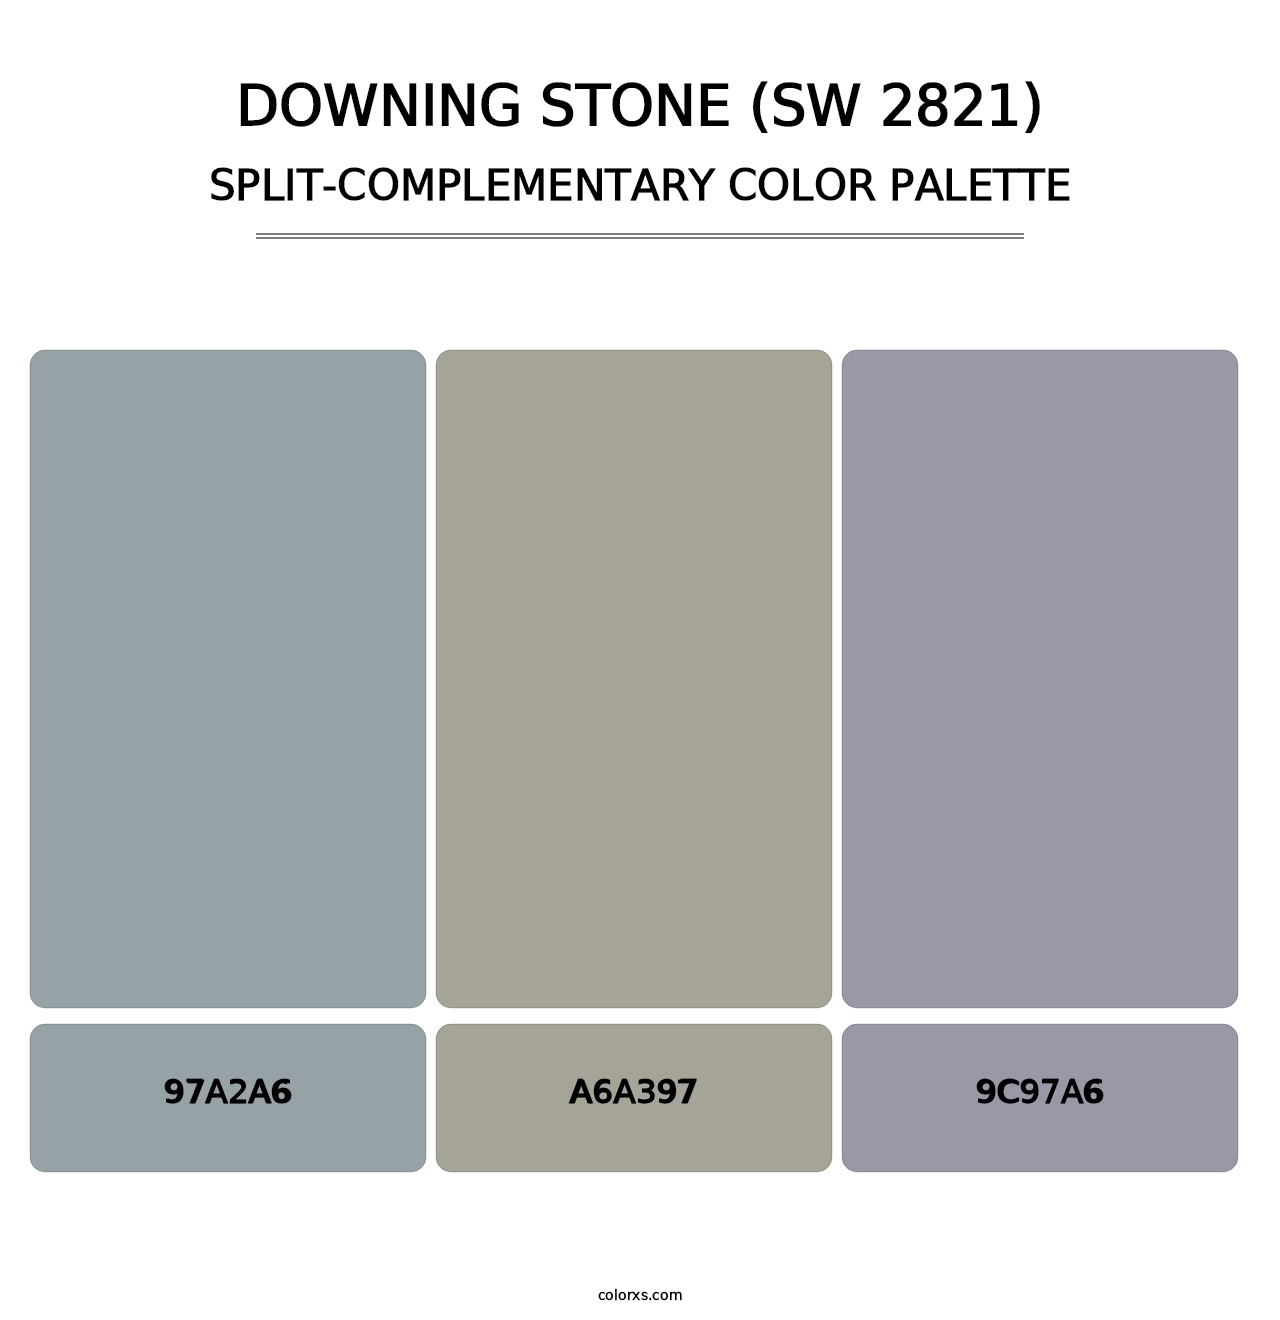 Downing Stone (SW 2821) - Split-Complementary Color Palette